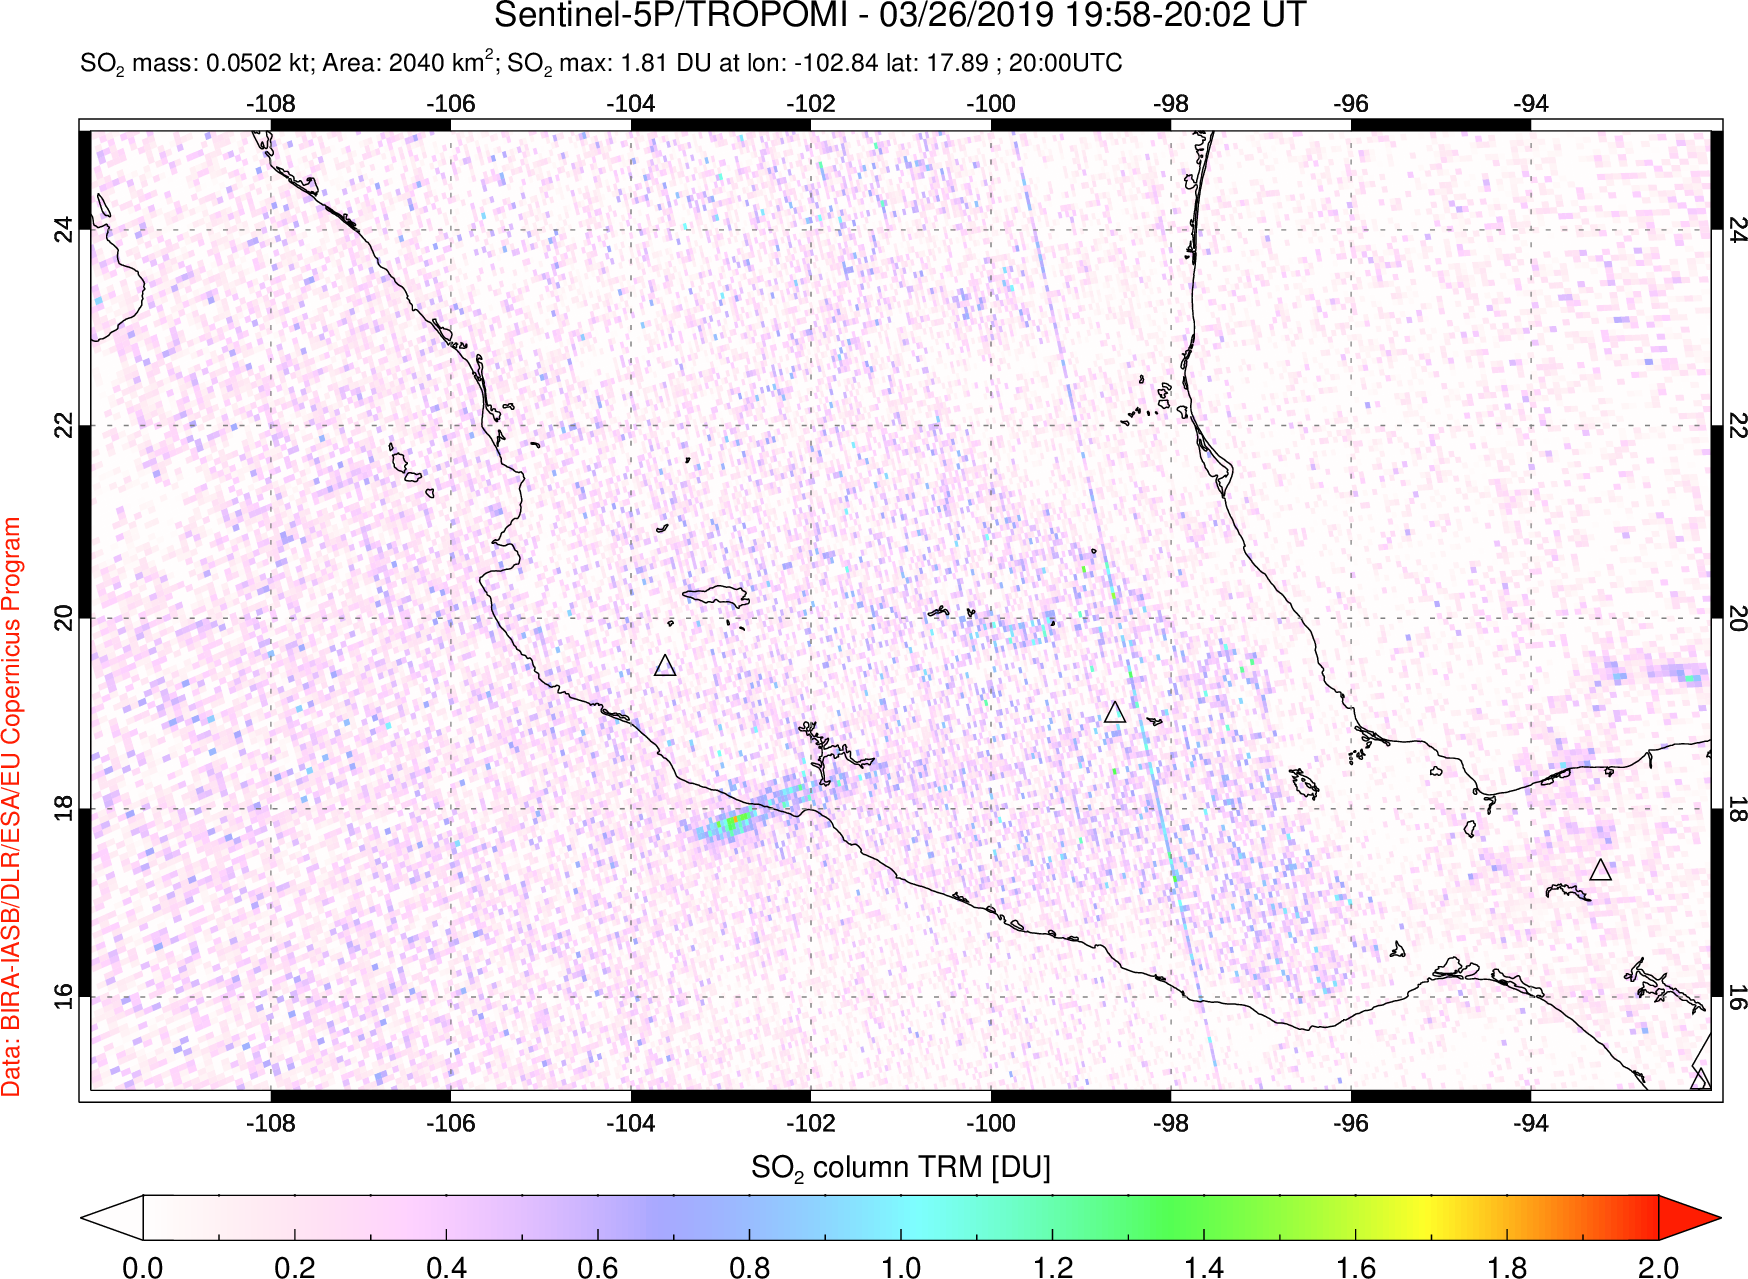 A sulfur dioxide image over Mexico on Mar 26, 2019.